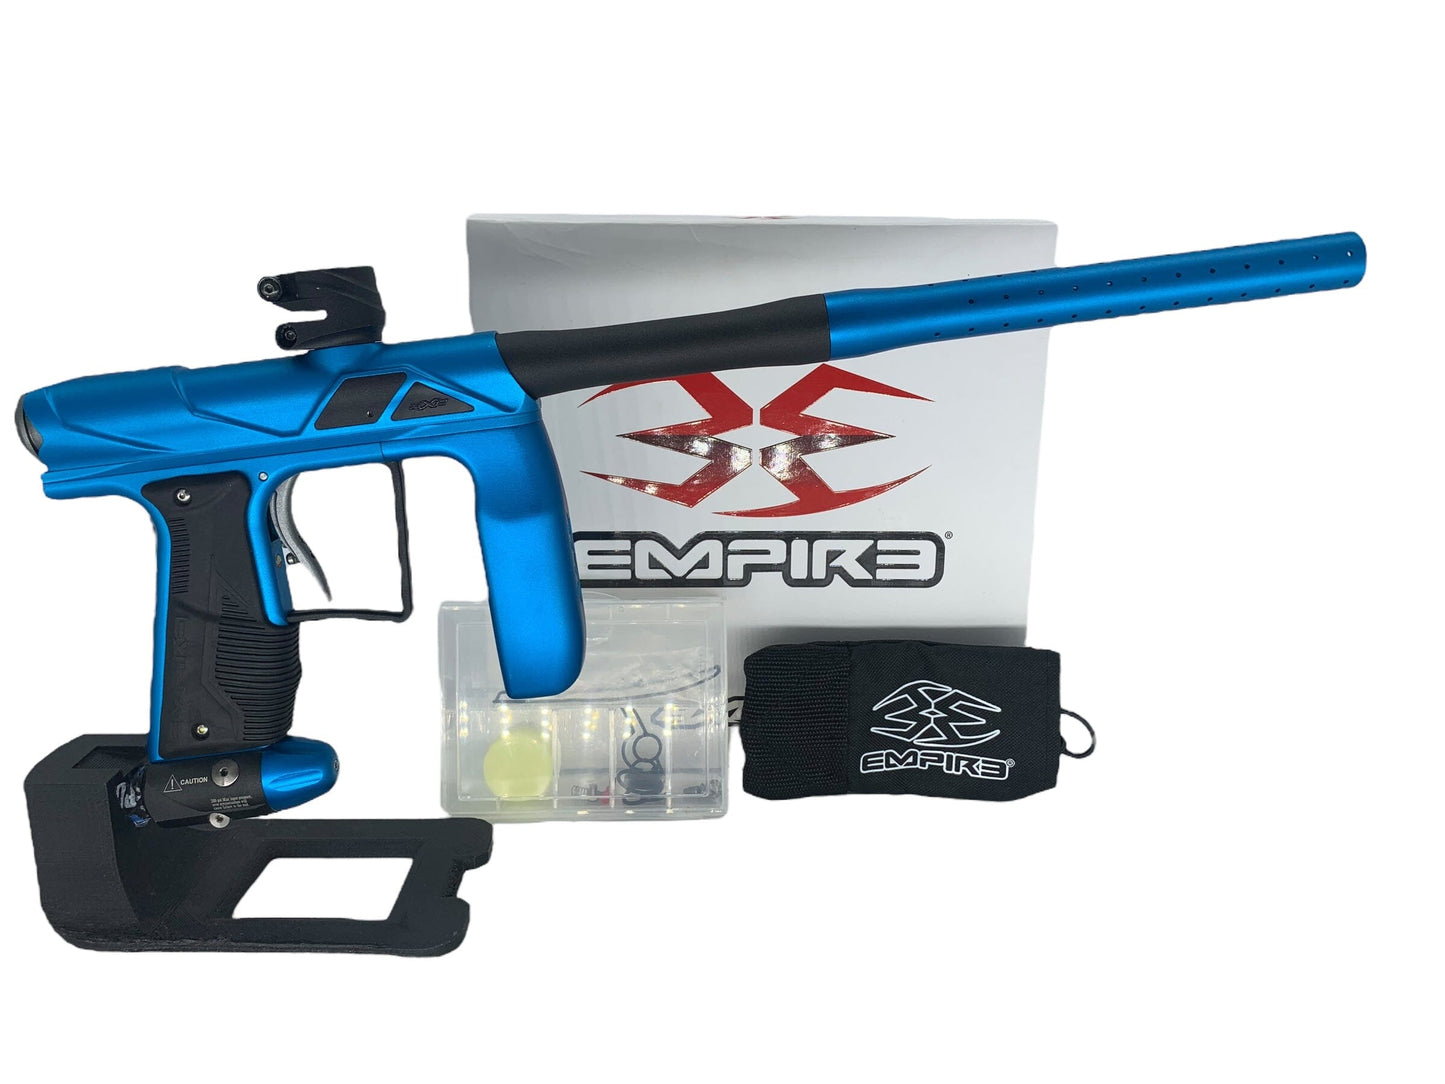 Used Empire Axe Pro Paintball Gun Paintball Gun from CPXBrosPaintball Buy/Sell/Trade Paintball Markers, New Paintball Guns, Paintball Hoppers, Paintball Masks, and Hormesis Headbands